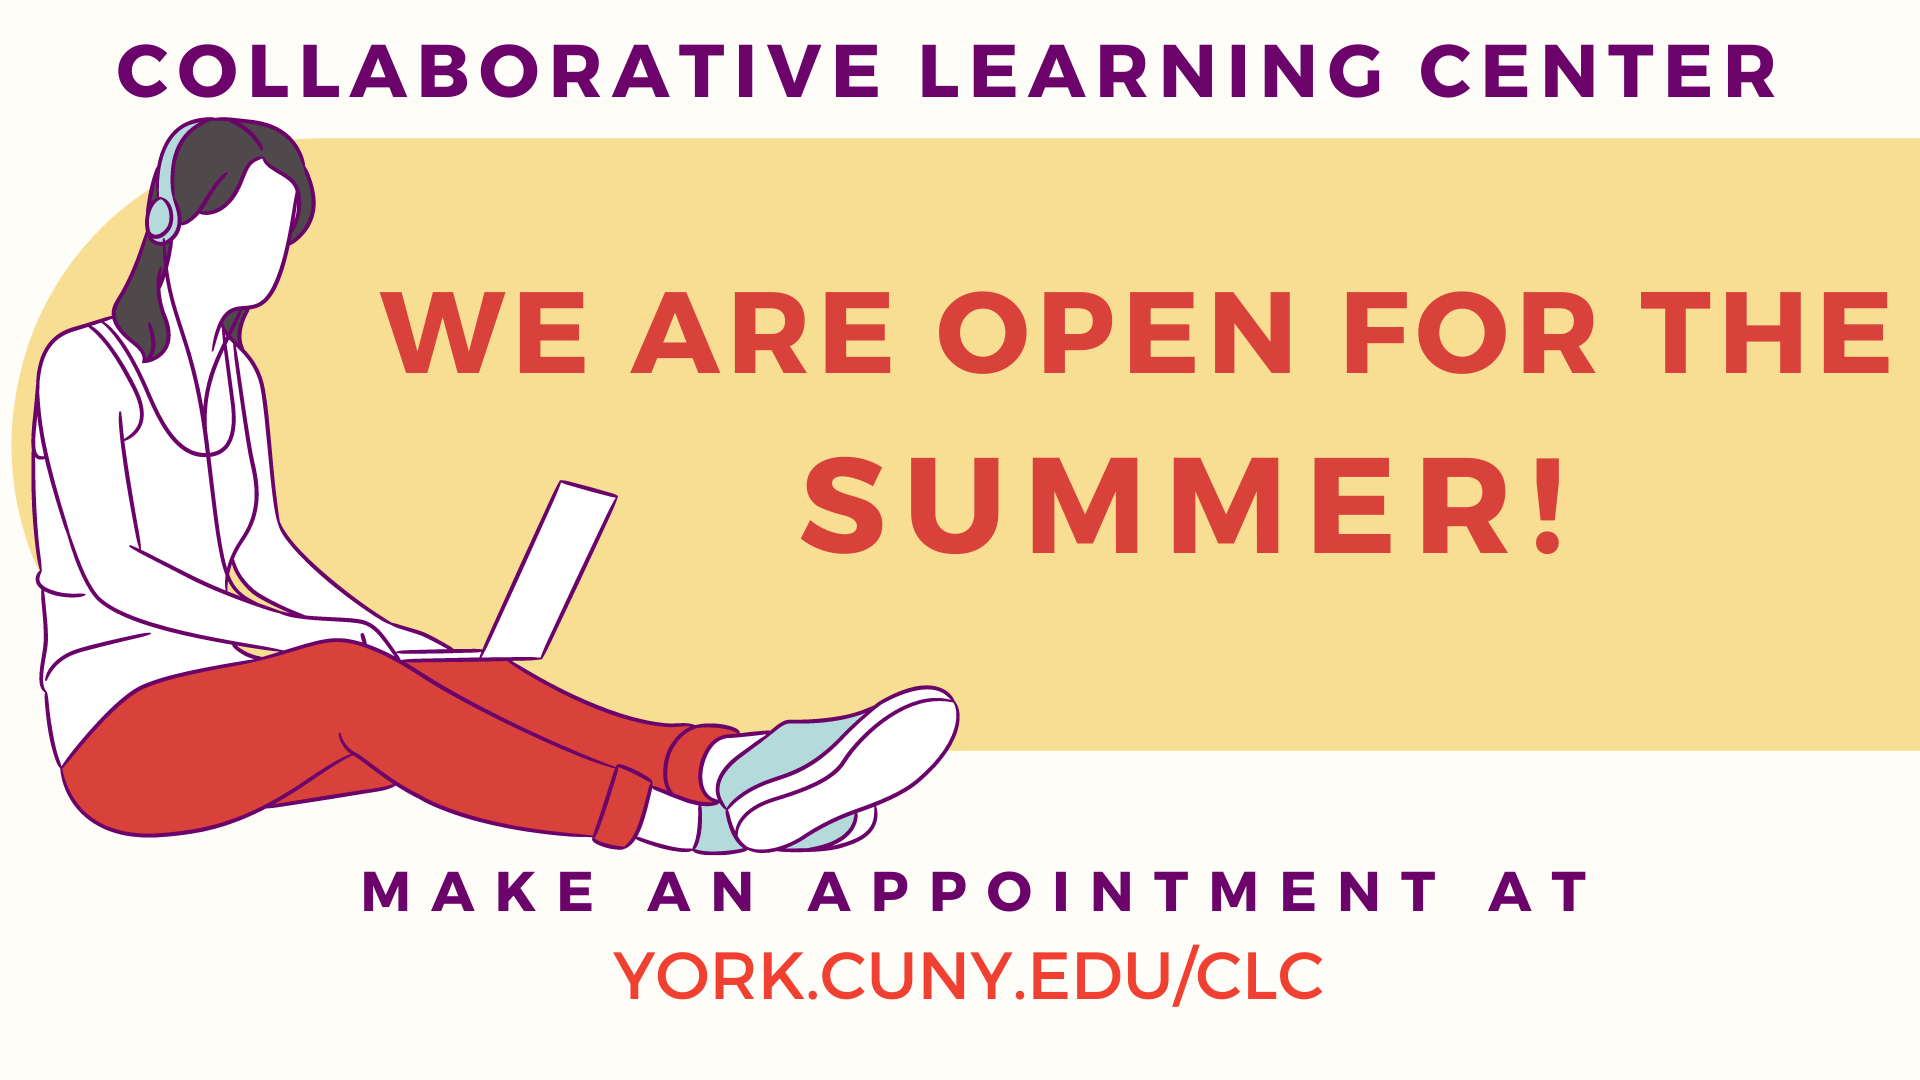 Summer Tutoring at the CLC is Available!